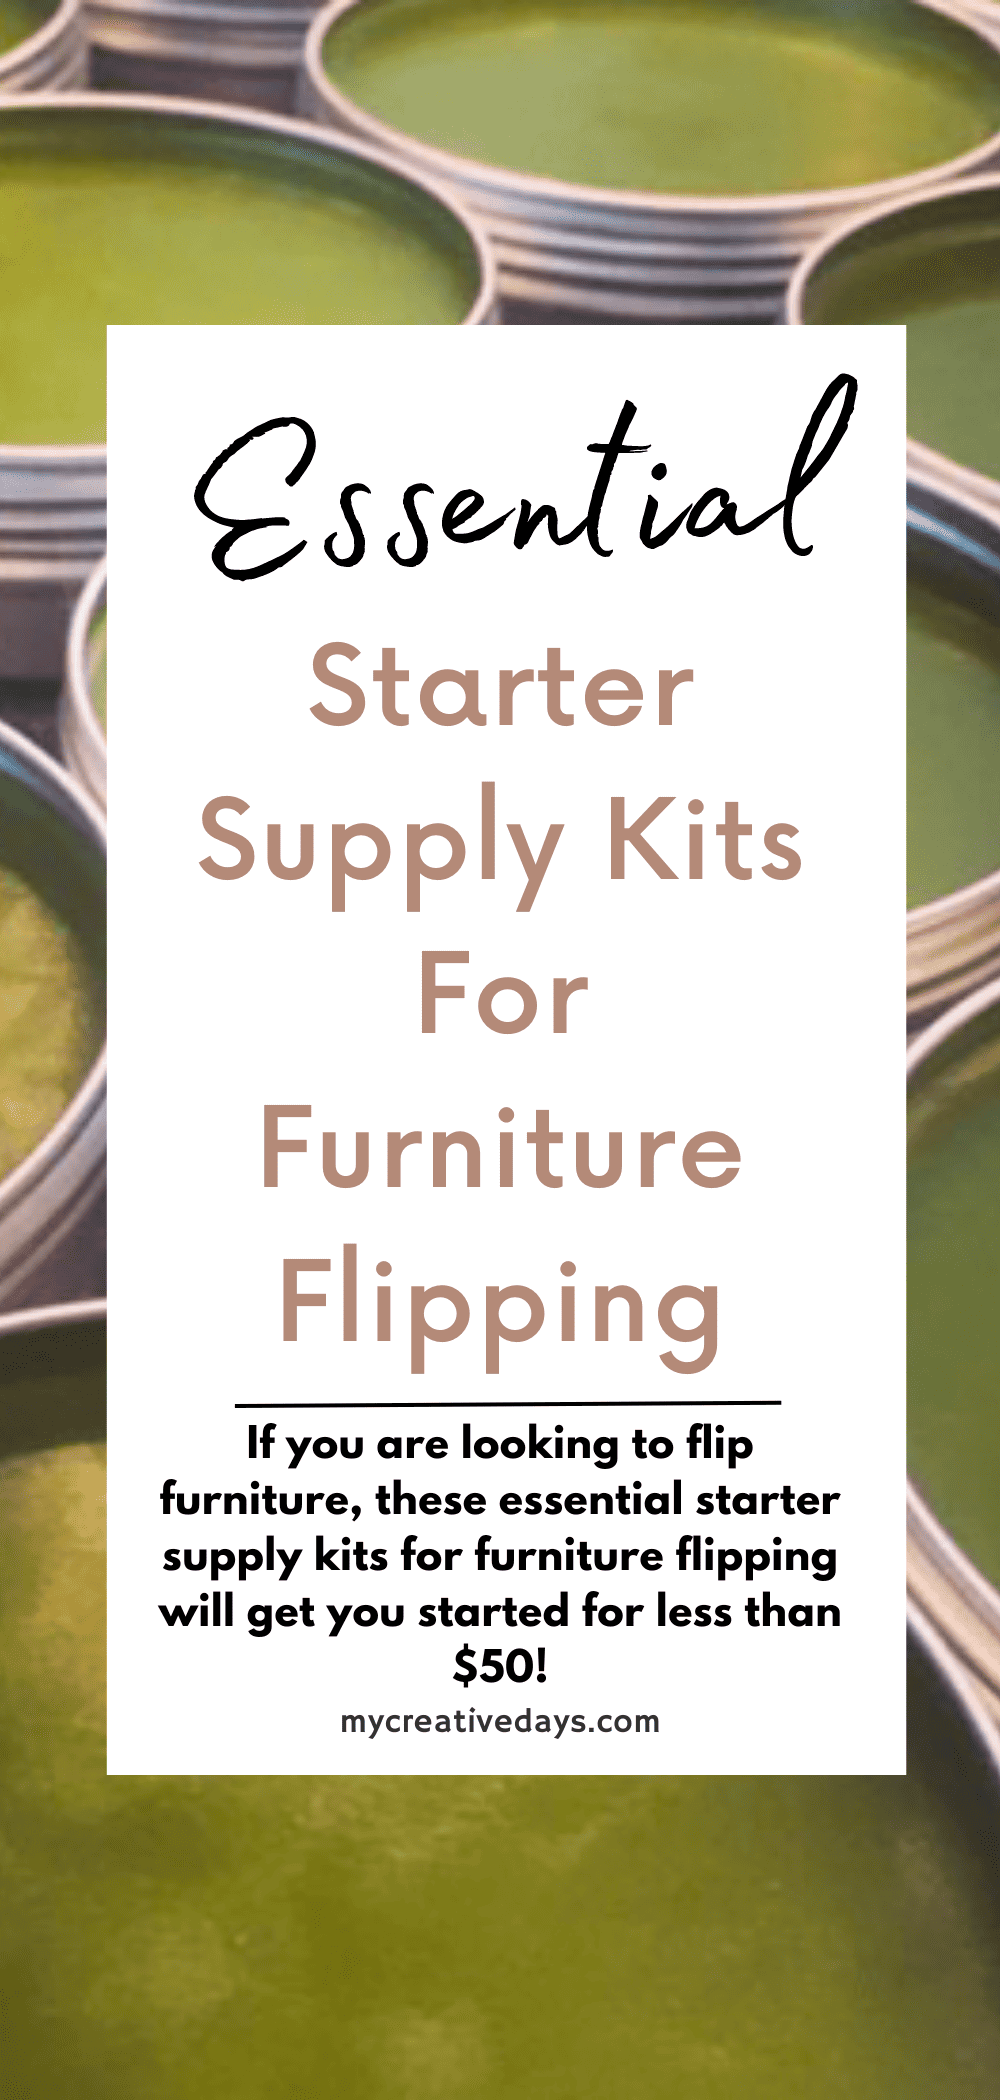 If you are looking to flip furniture, these essential starter supply kits for furniture flipping will get you started for less than $50!